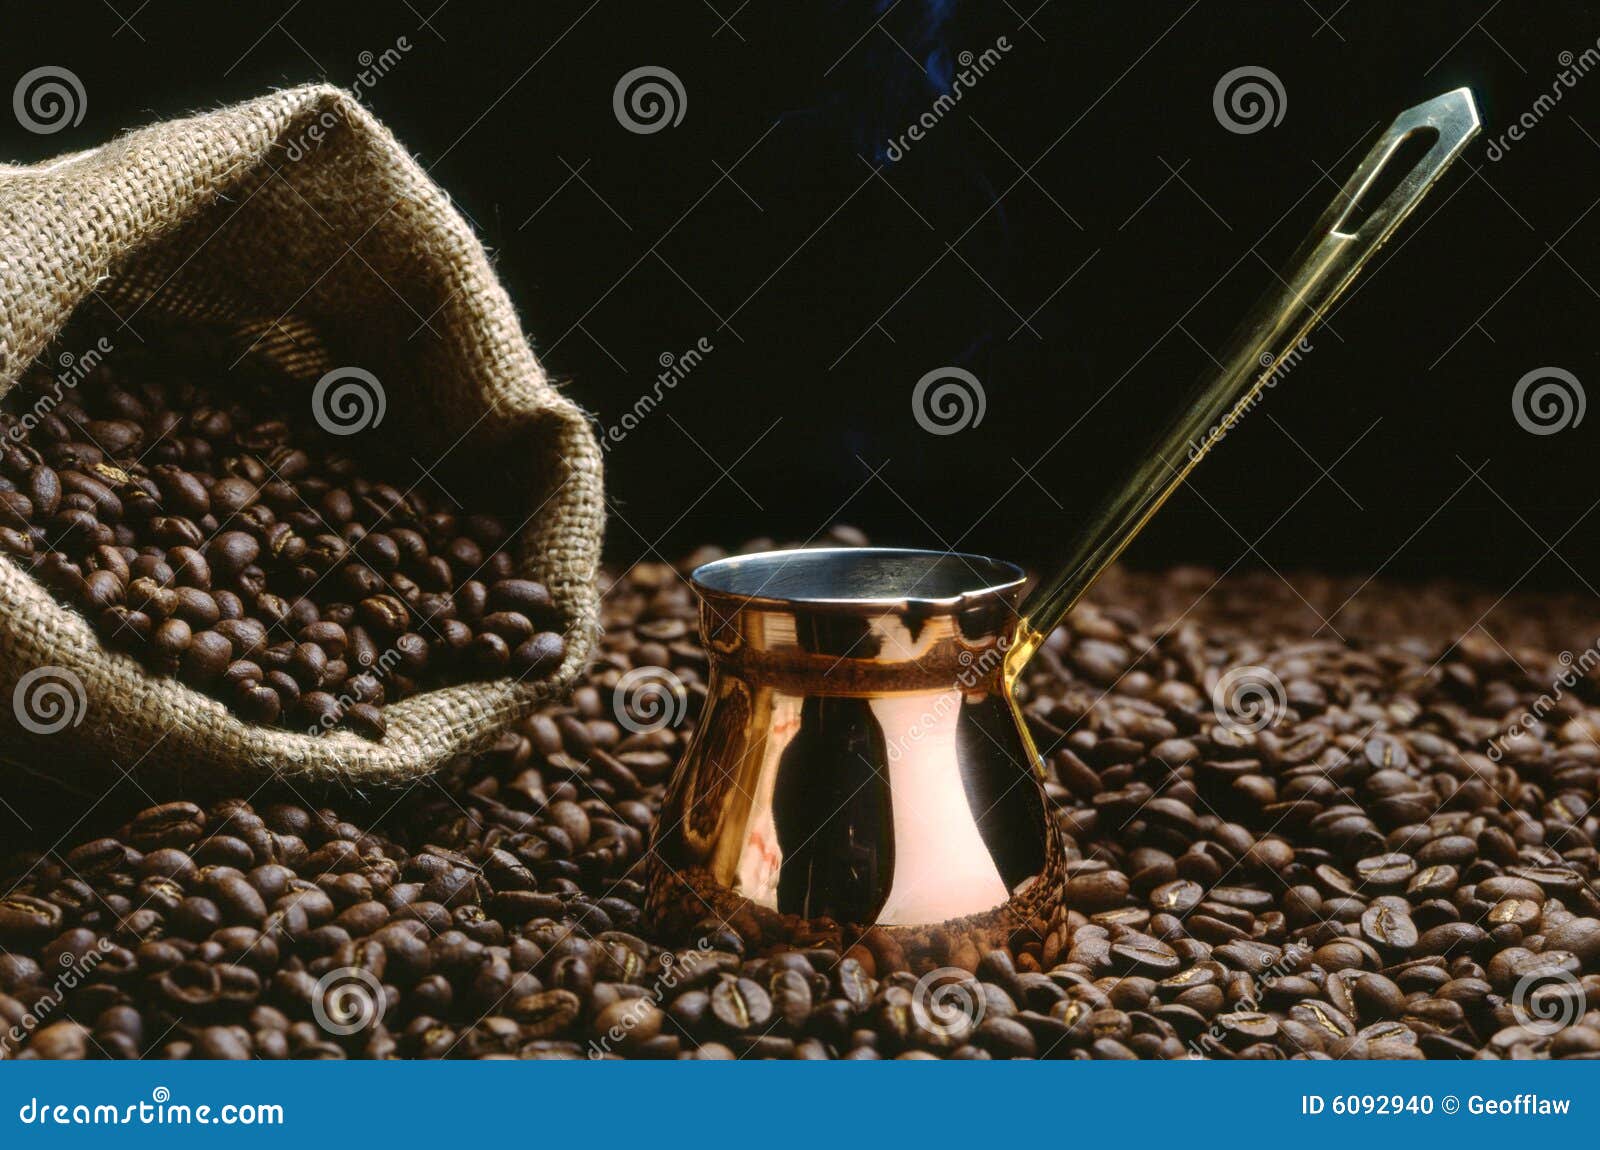 a turkish coffee pot with beans